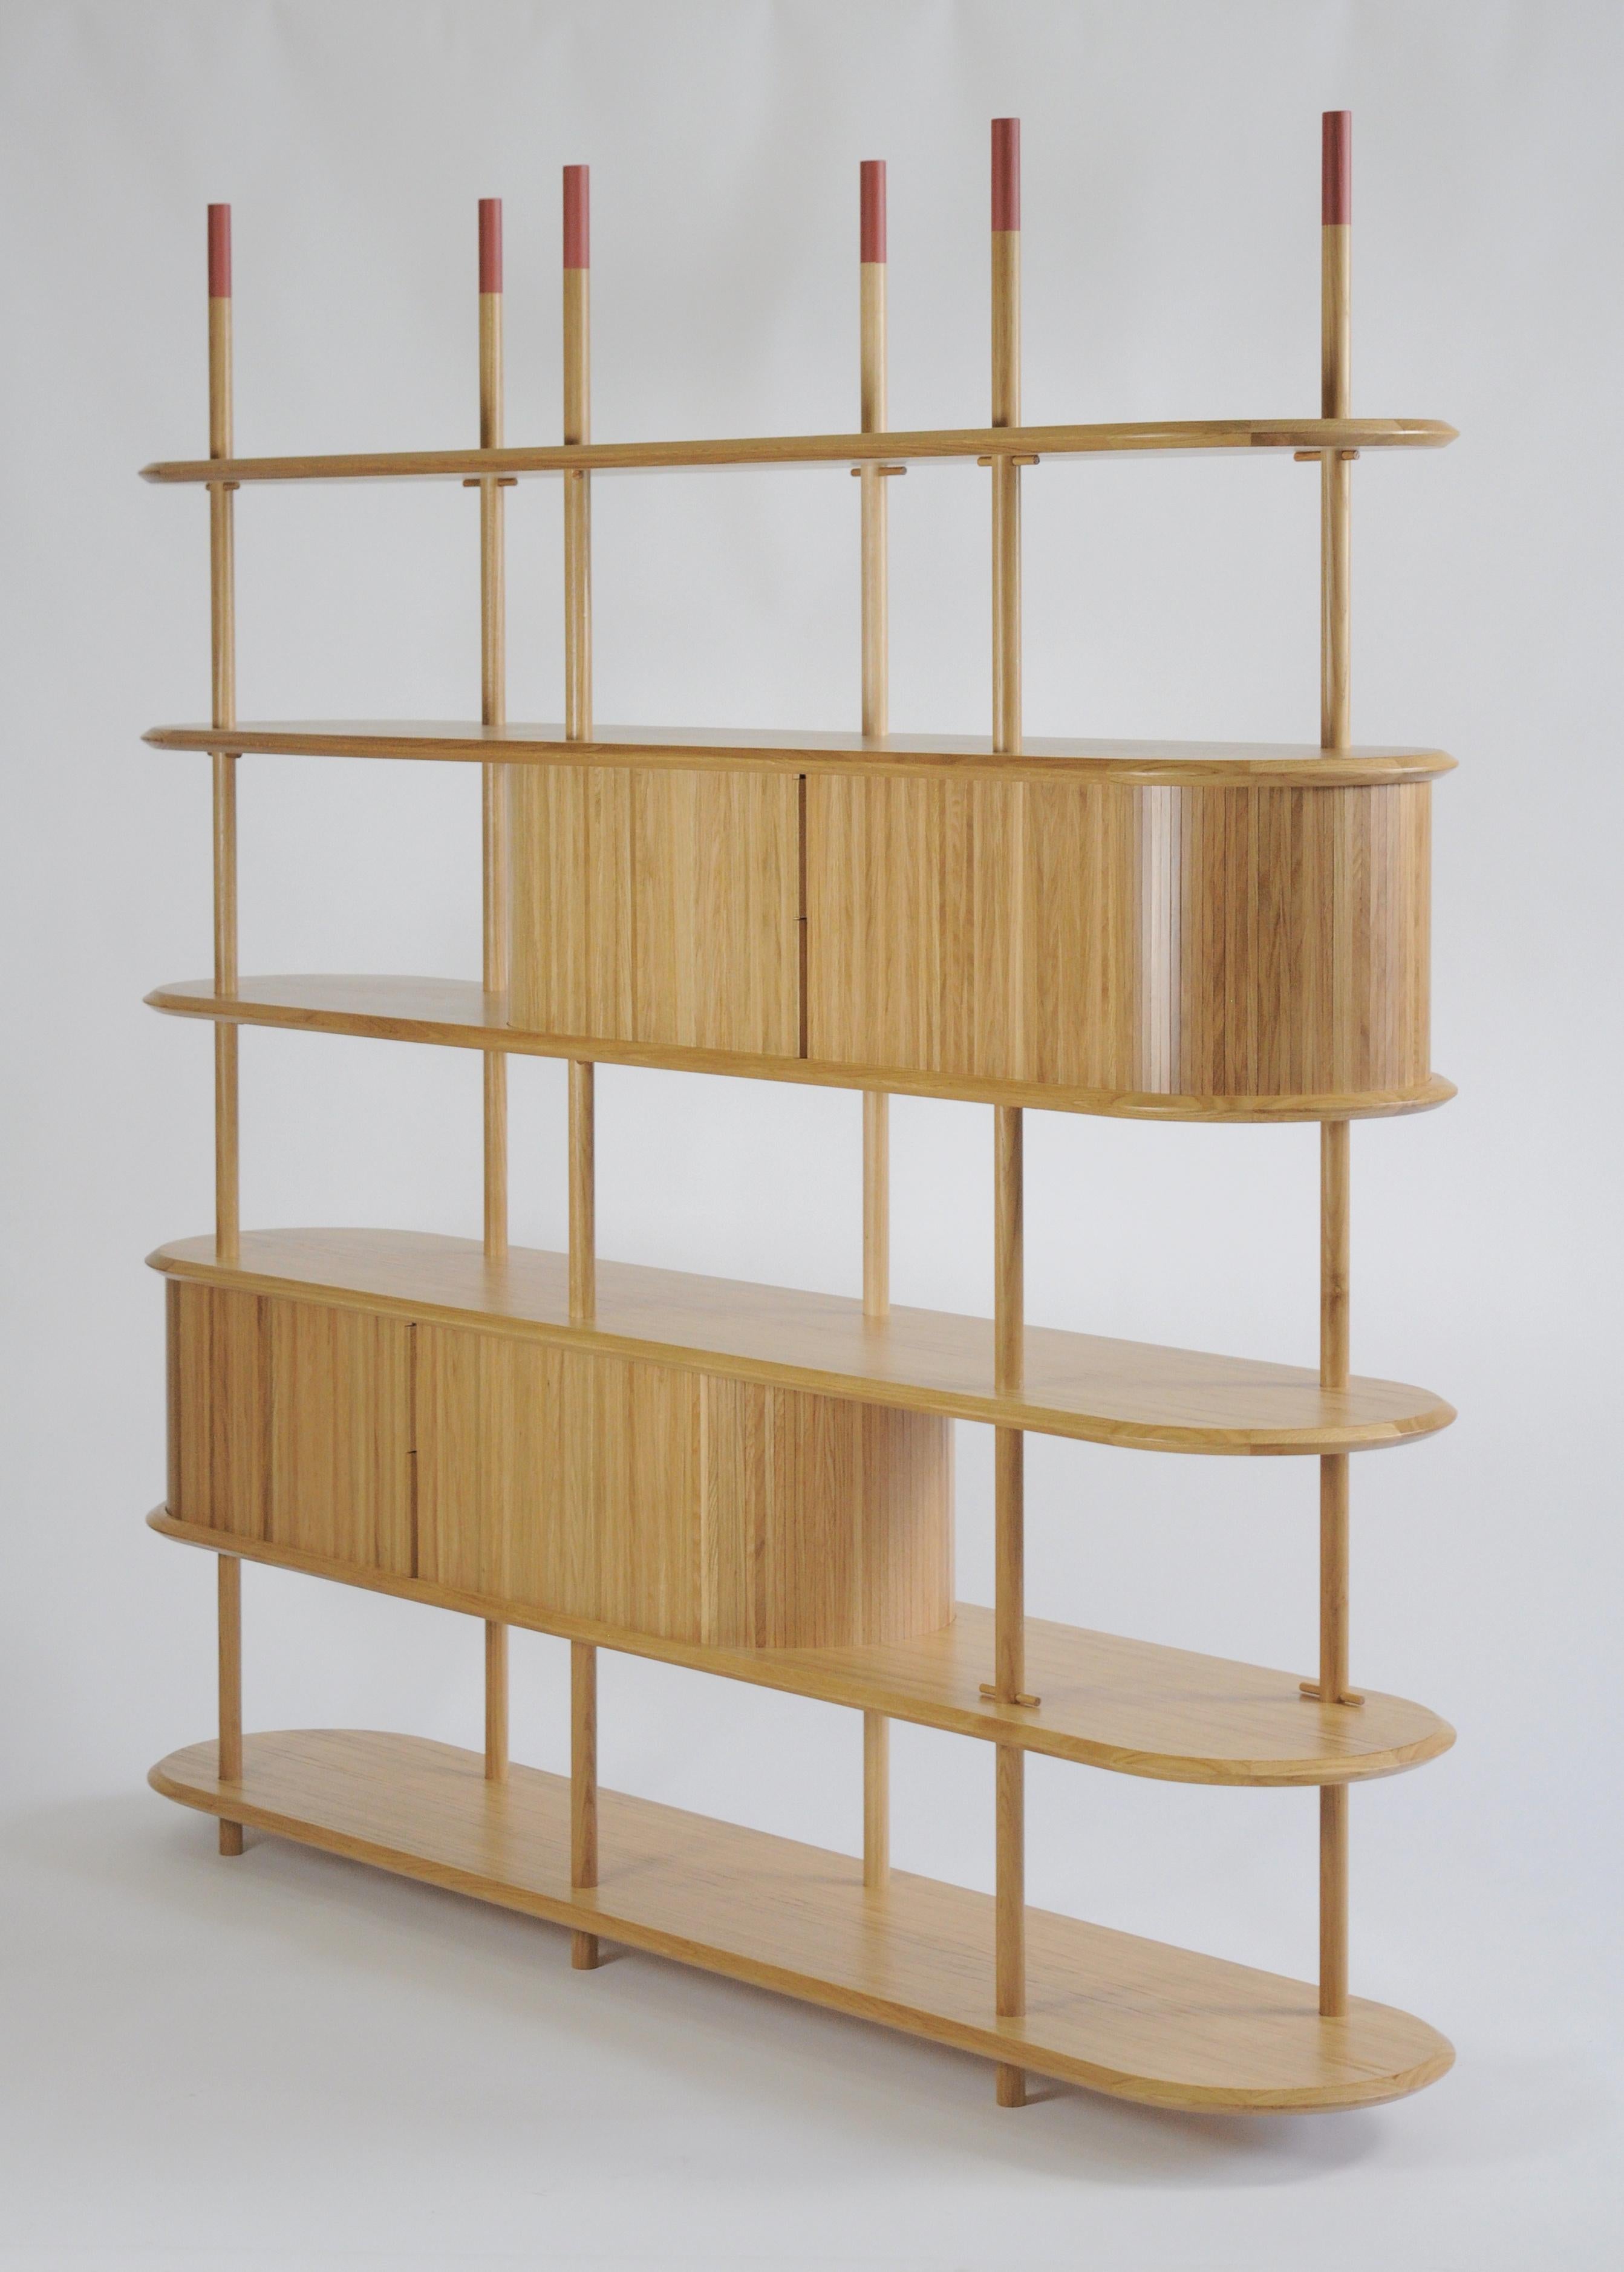 Bookcase made of a series of solid wood poles with circular section, veneered shelves with solid wood edging, all made of Oak wood finished with transparent paint. The head of the poles is coated with a brick red protective paint.
The system is